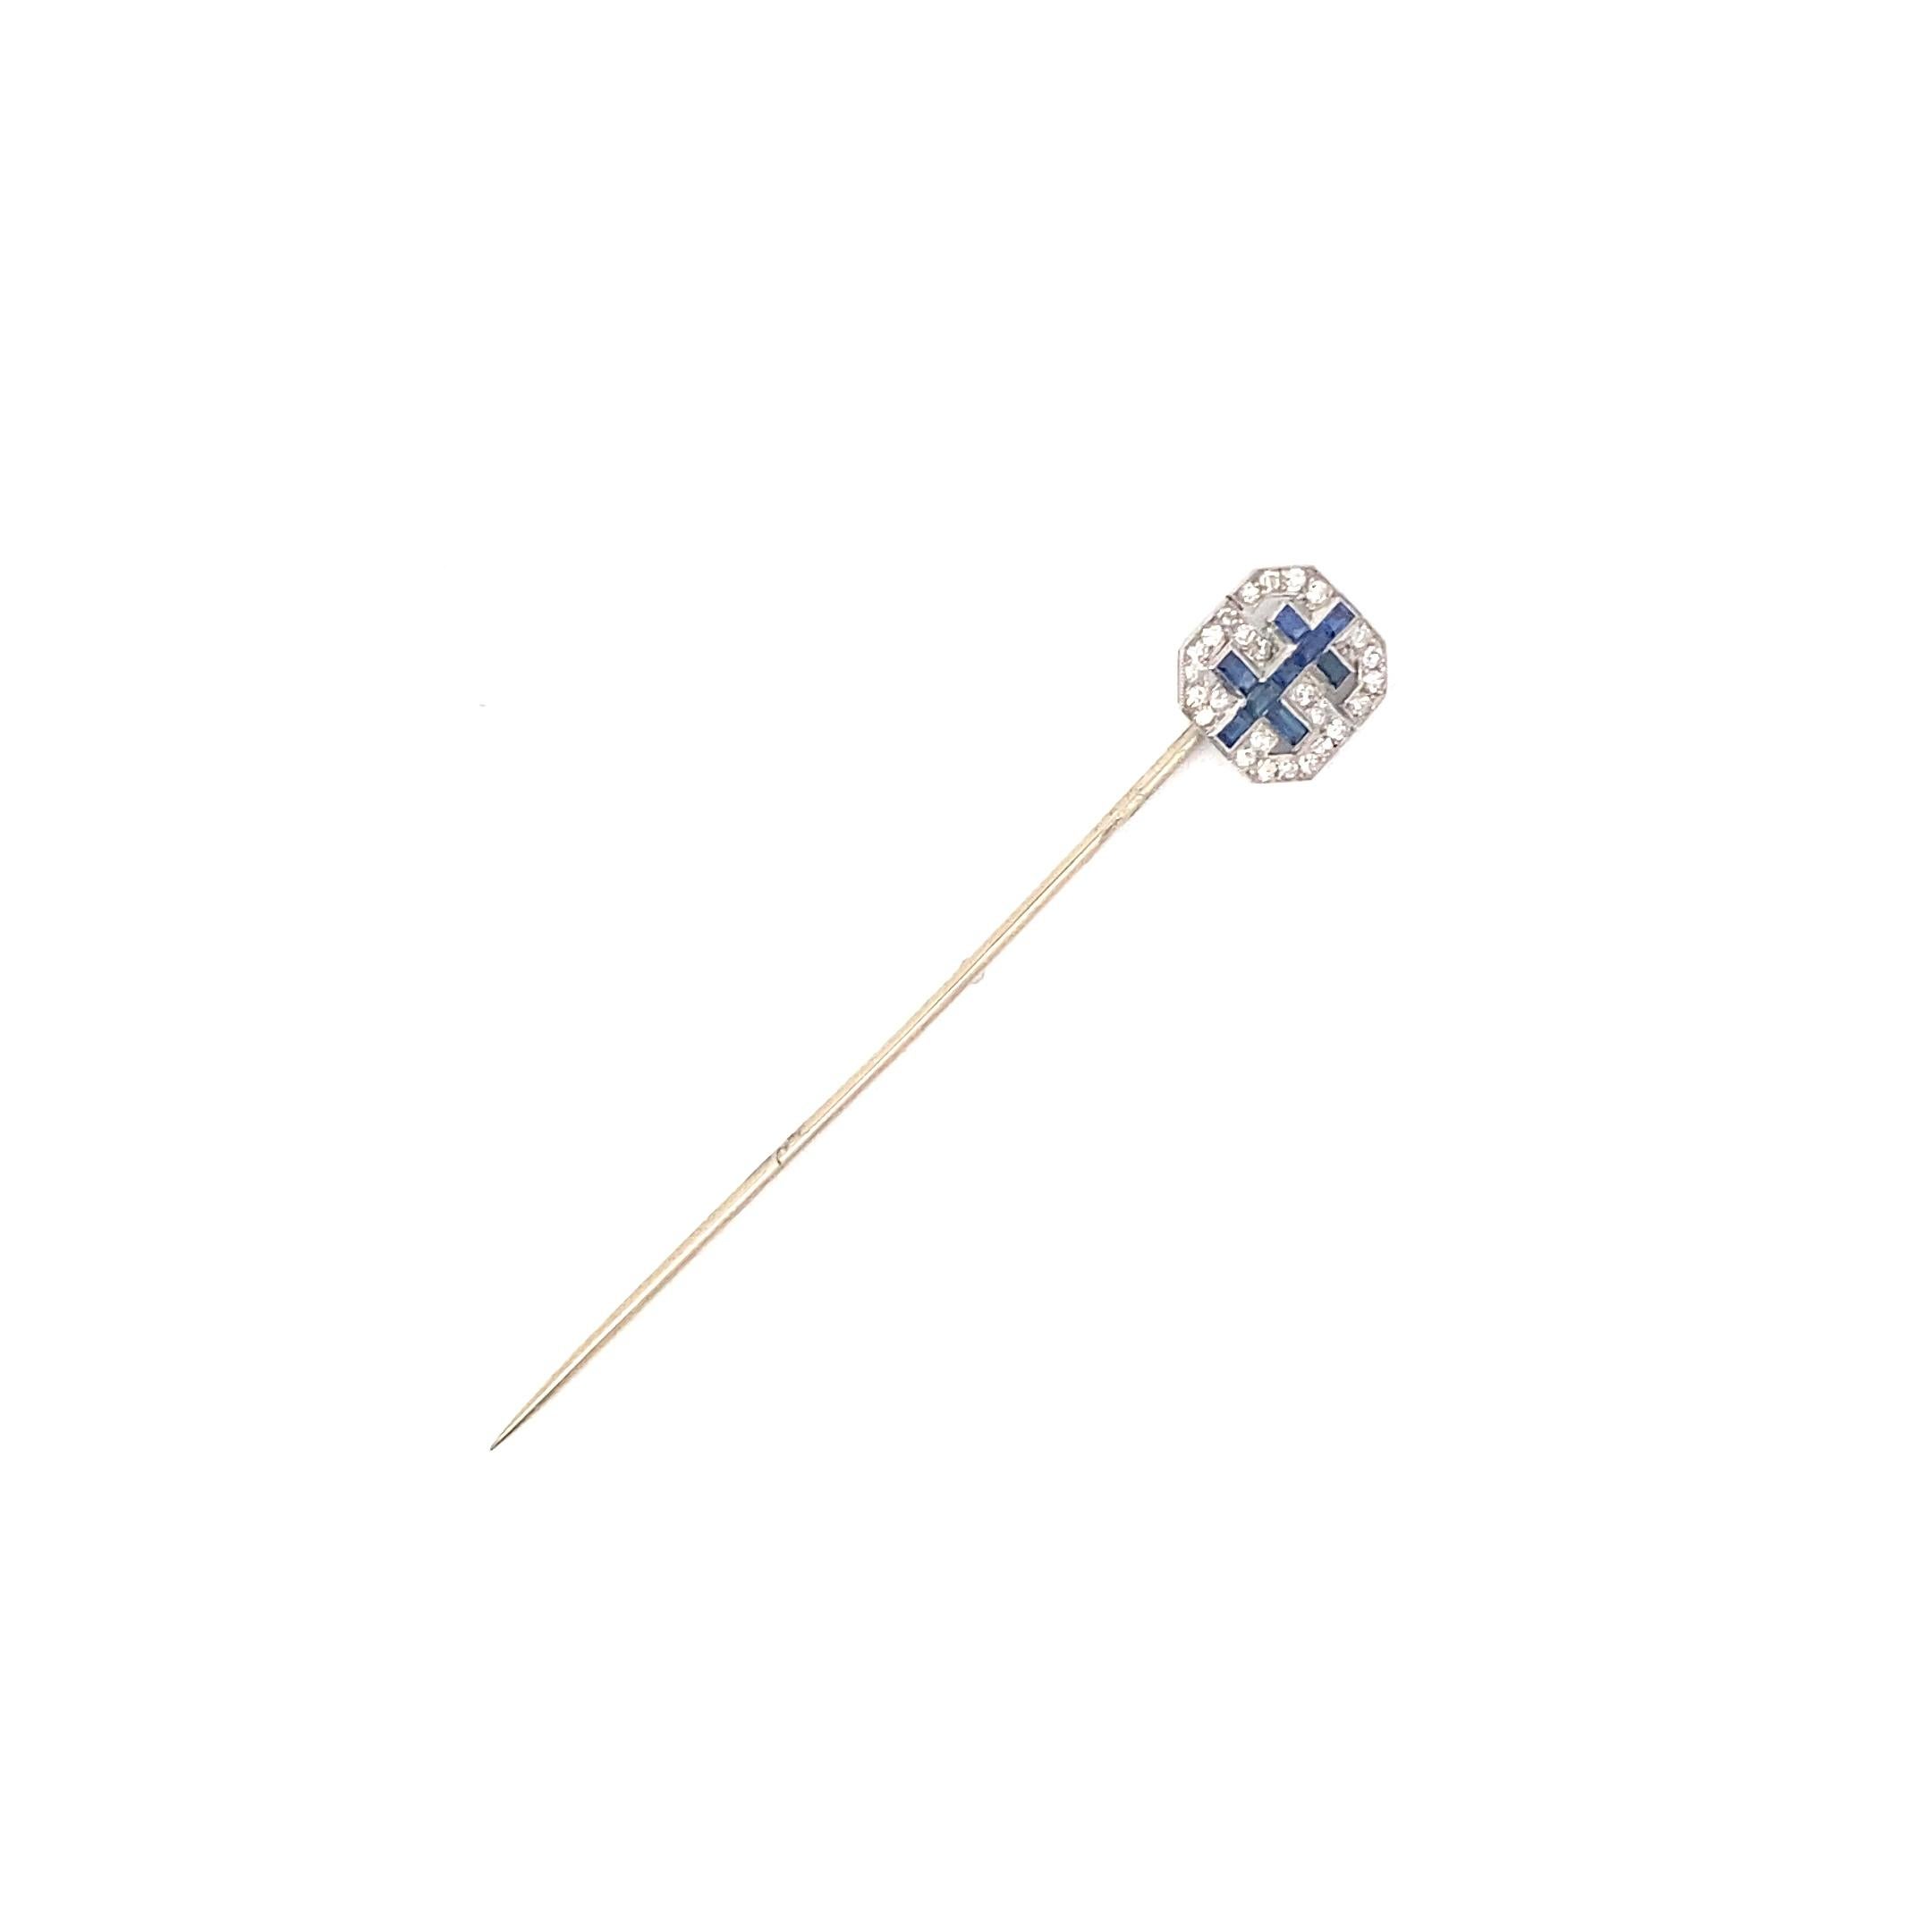 Women's or Men's Antique french 18k Diamond & Sapphire Stick Pin (Patterned Sapphires) For Sale